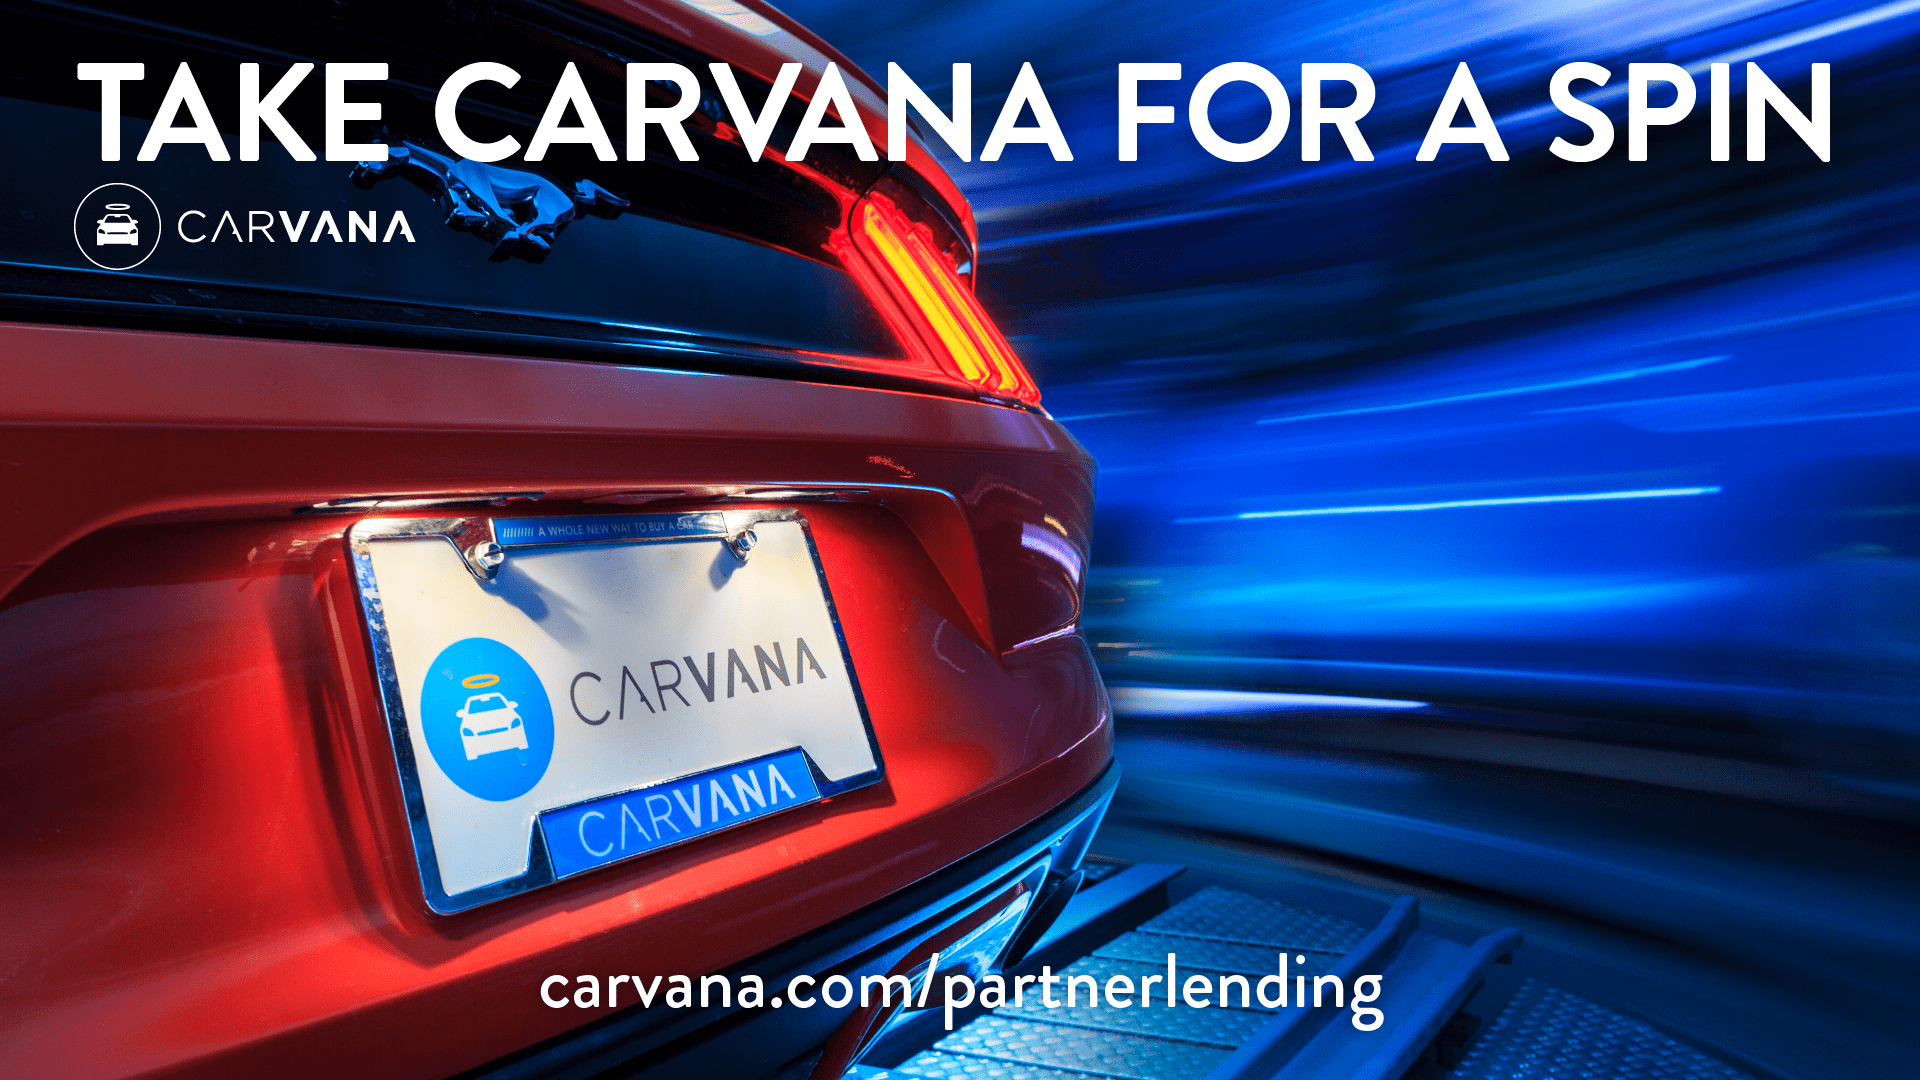 Take Carvana For A Spin- Carvana.com/partnerlending- Red Ford Mustang bumper.